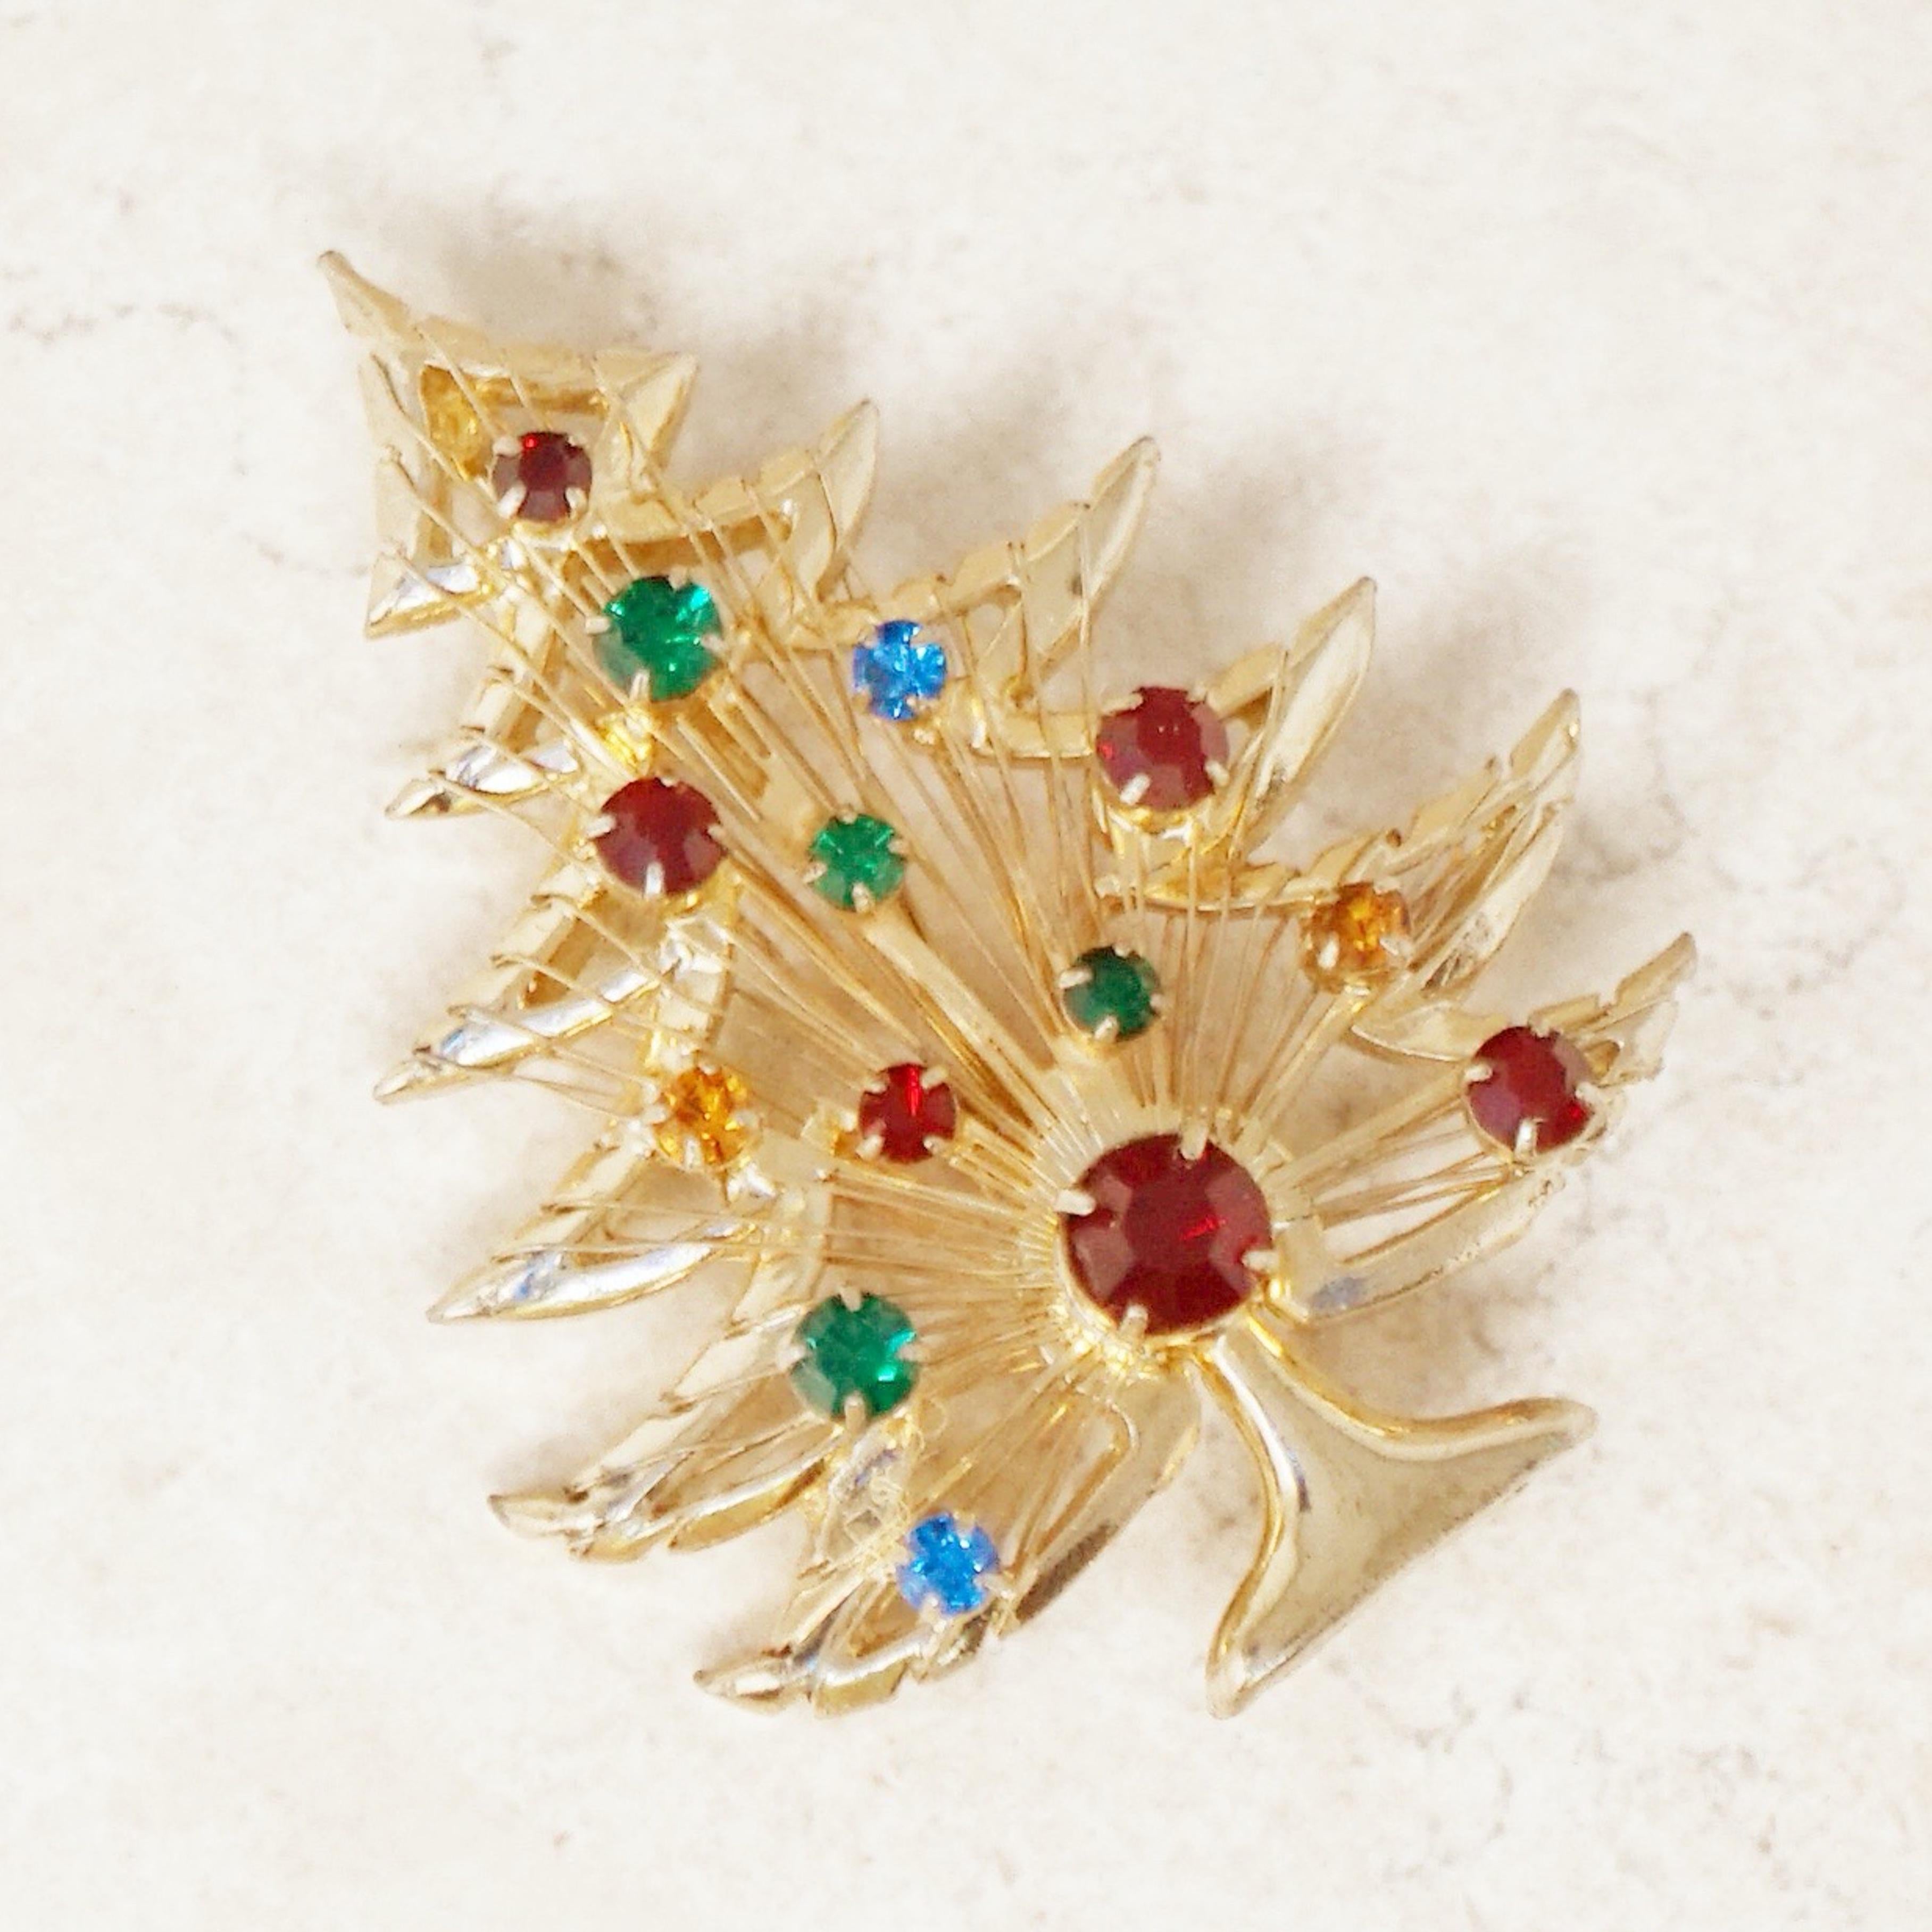 Modern Gold Wire Work Christmas Tree Brooch with Colored Rhinestones by Brooks, 1950s